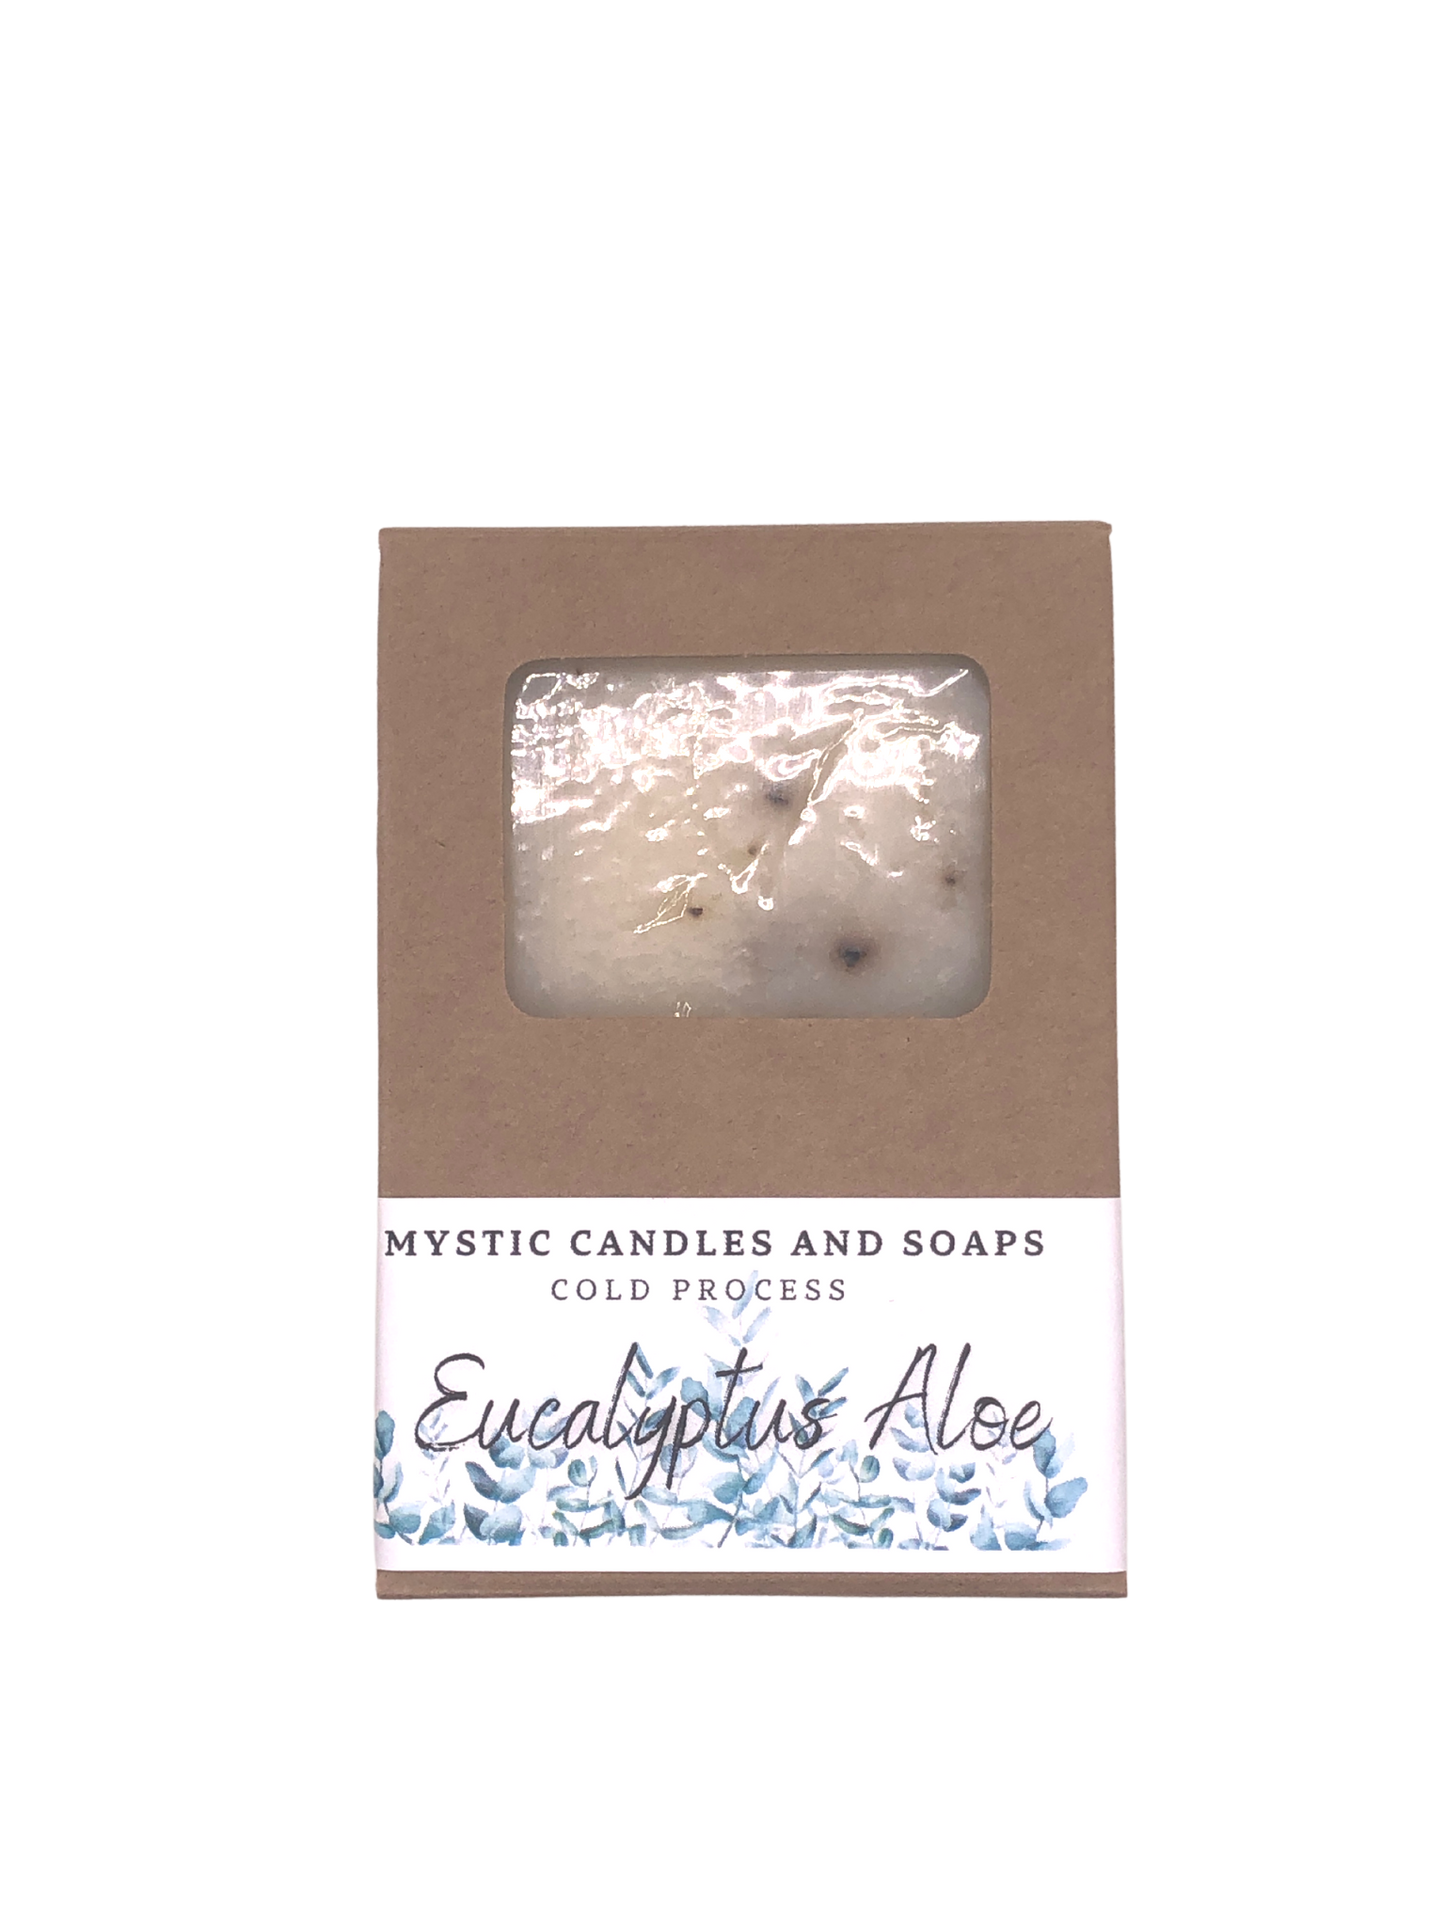 Eucalyptus Aloe Cold Process Handcrafted Bar Soap - Mystic Candles and Soaps LLC